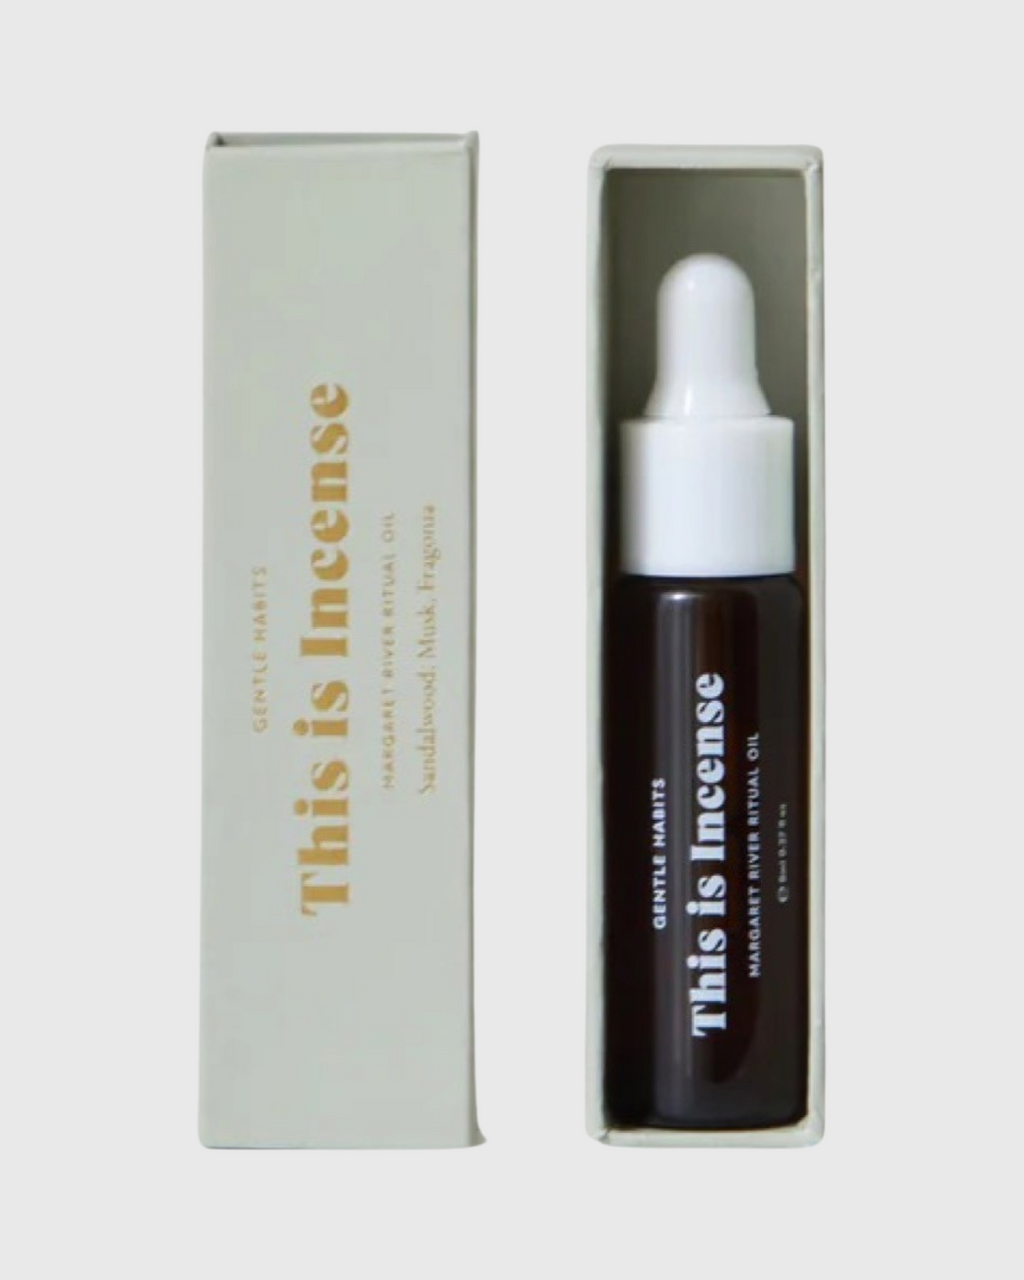 this is incense ritual diffuser oil margaret river